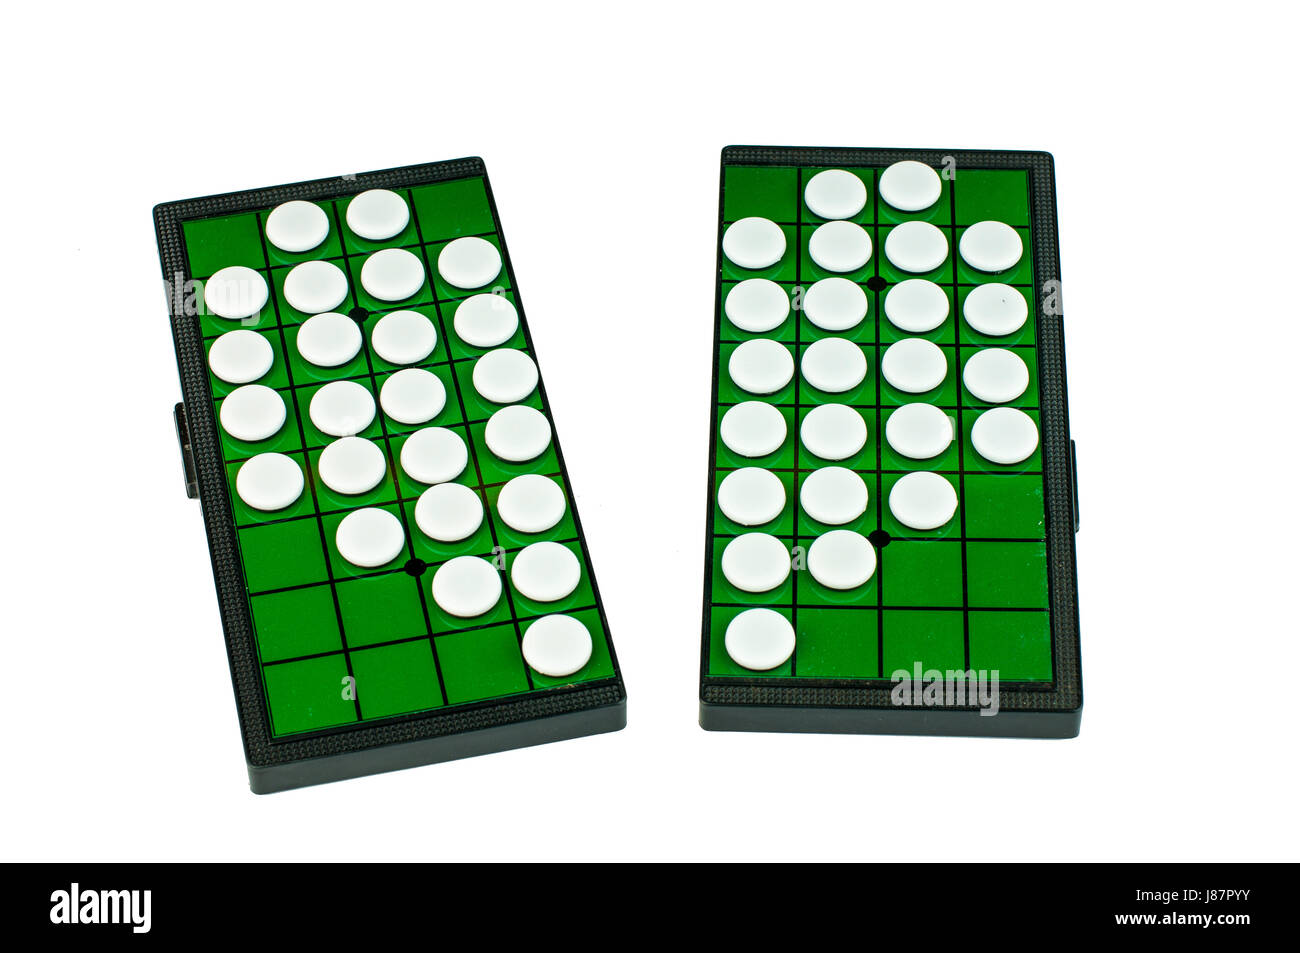 White Broken Heart Shaped Othellos on Separated Green Grid Othello Board Isolated Stock Photo